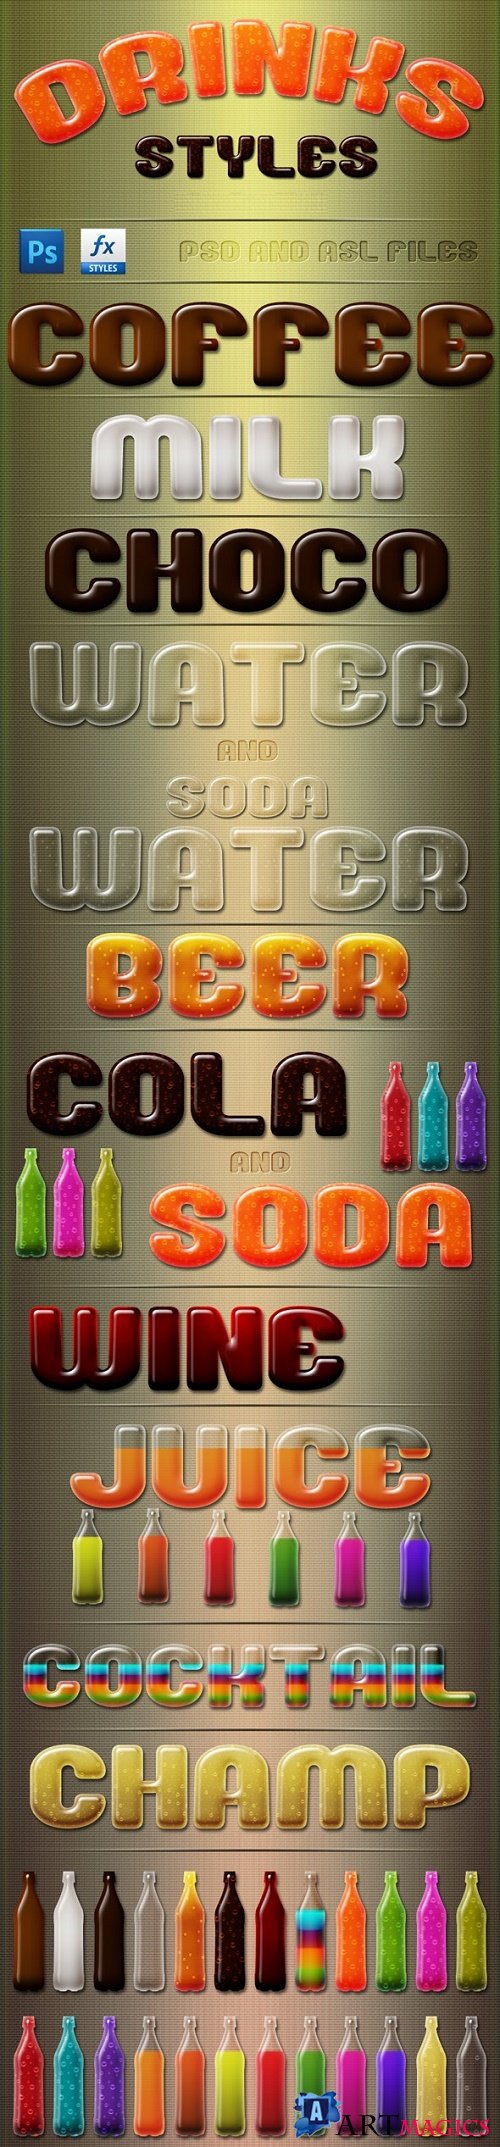 Drinks Styles Text Effects - 24392259